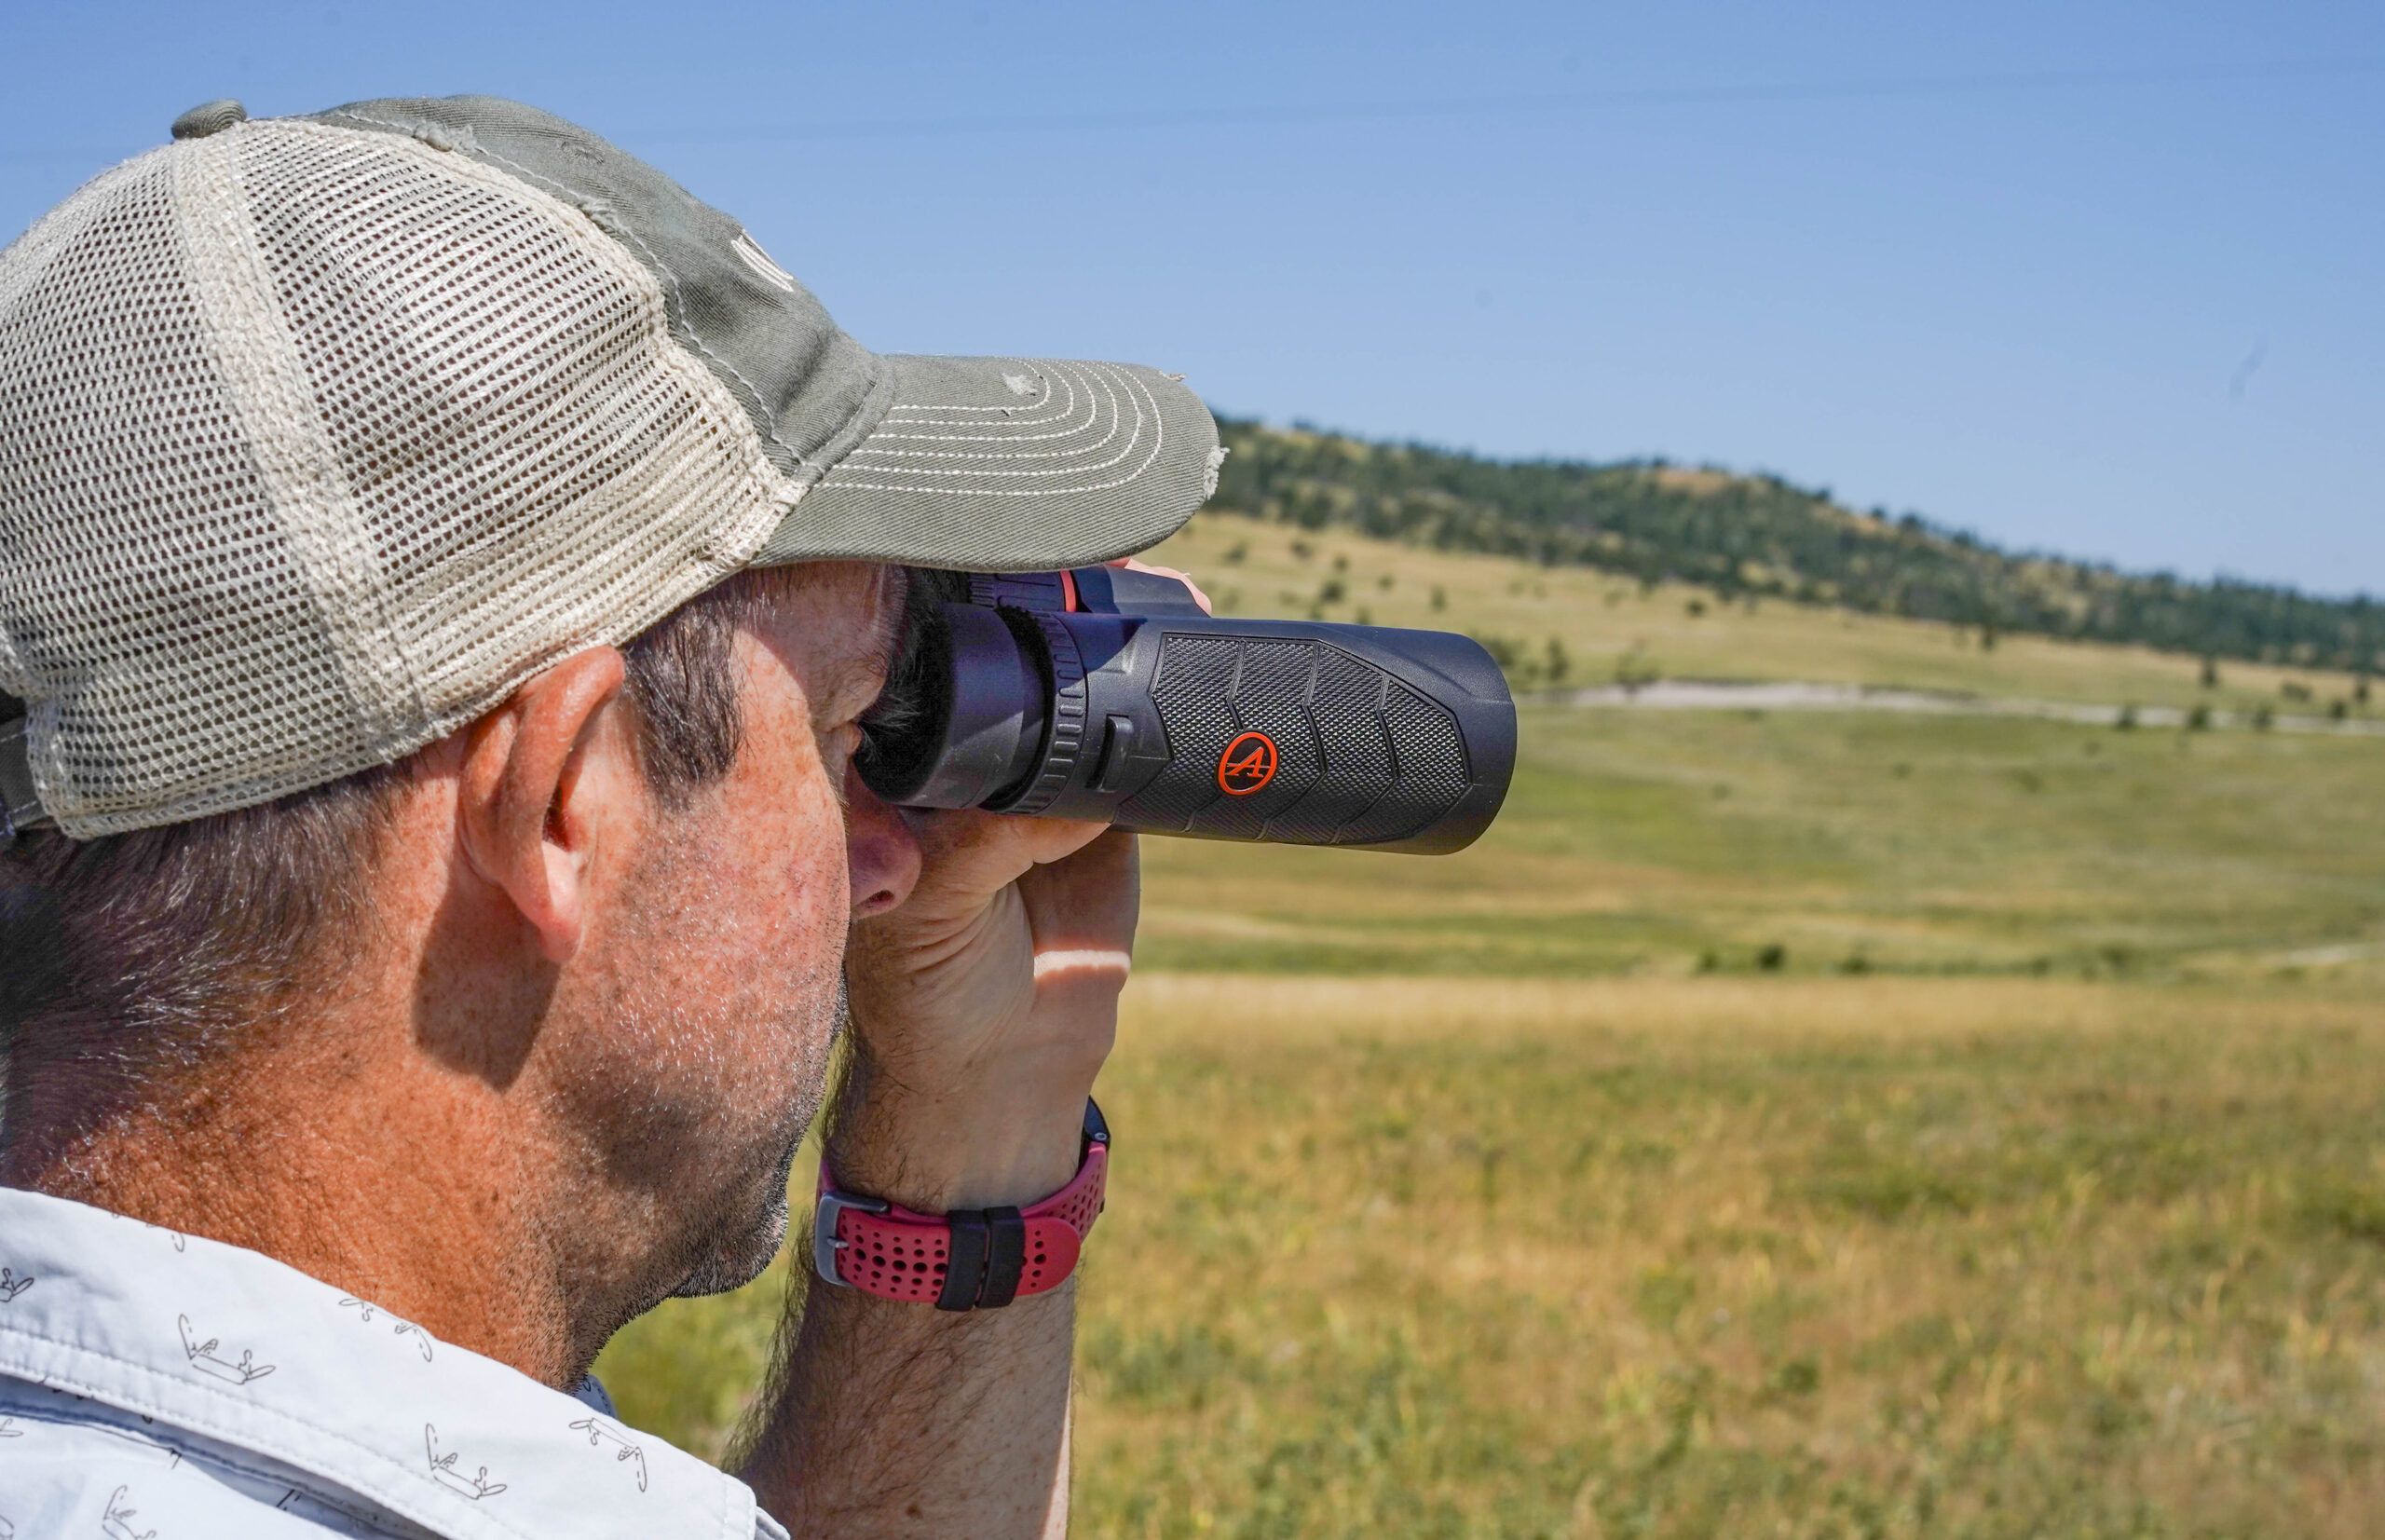 Testing one of the best binoculars for the money.